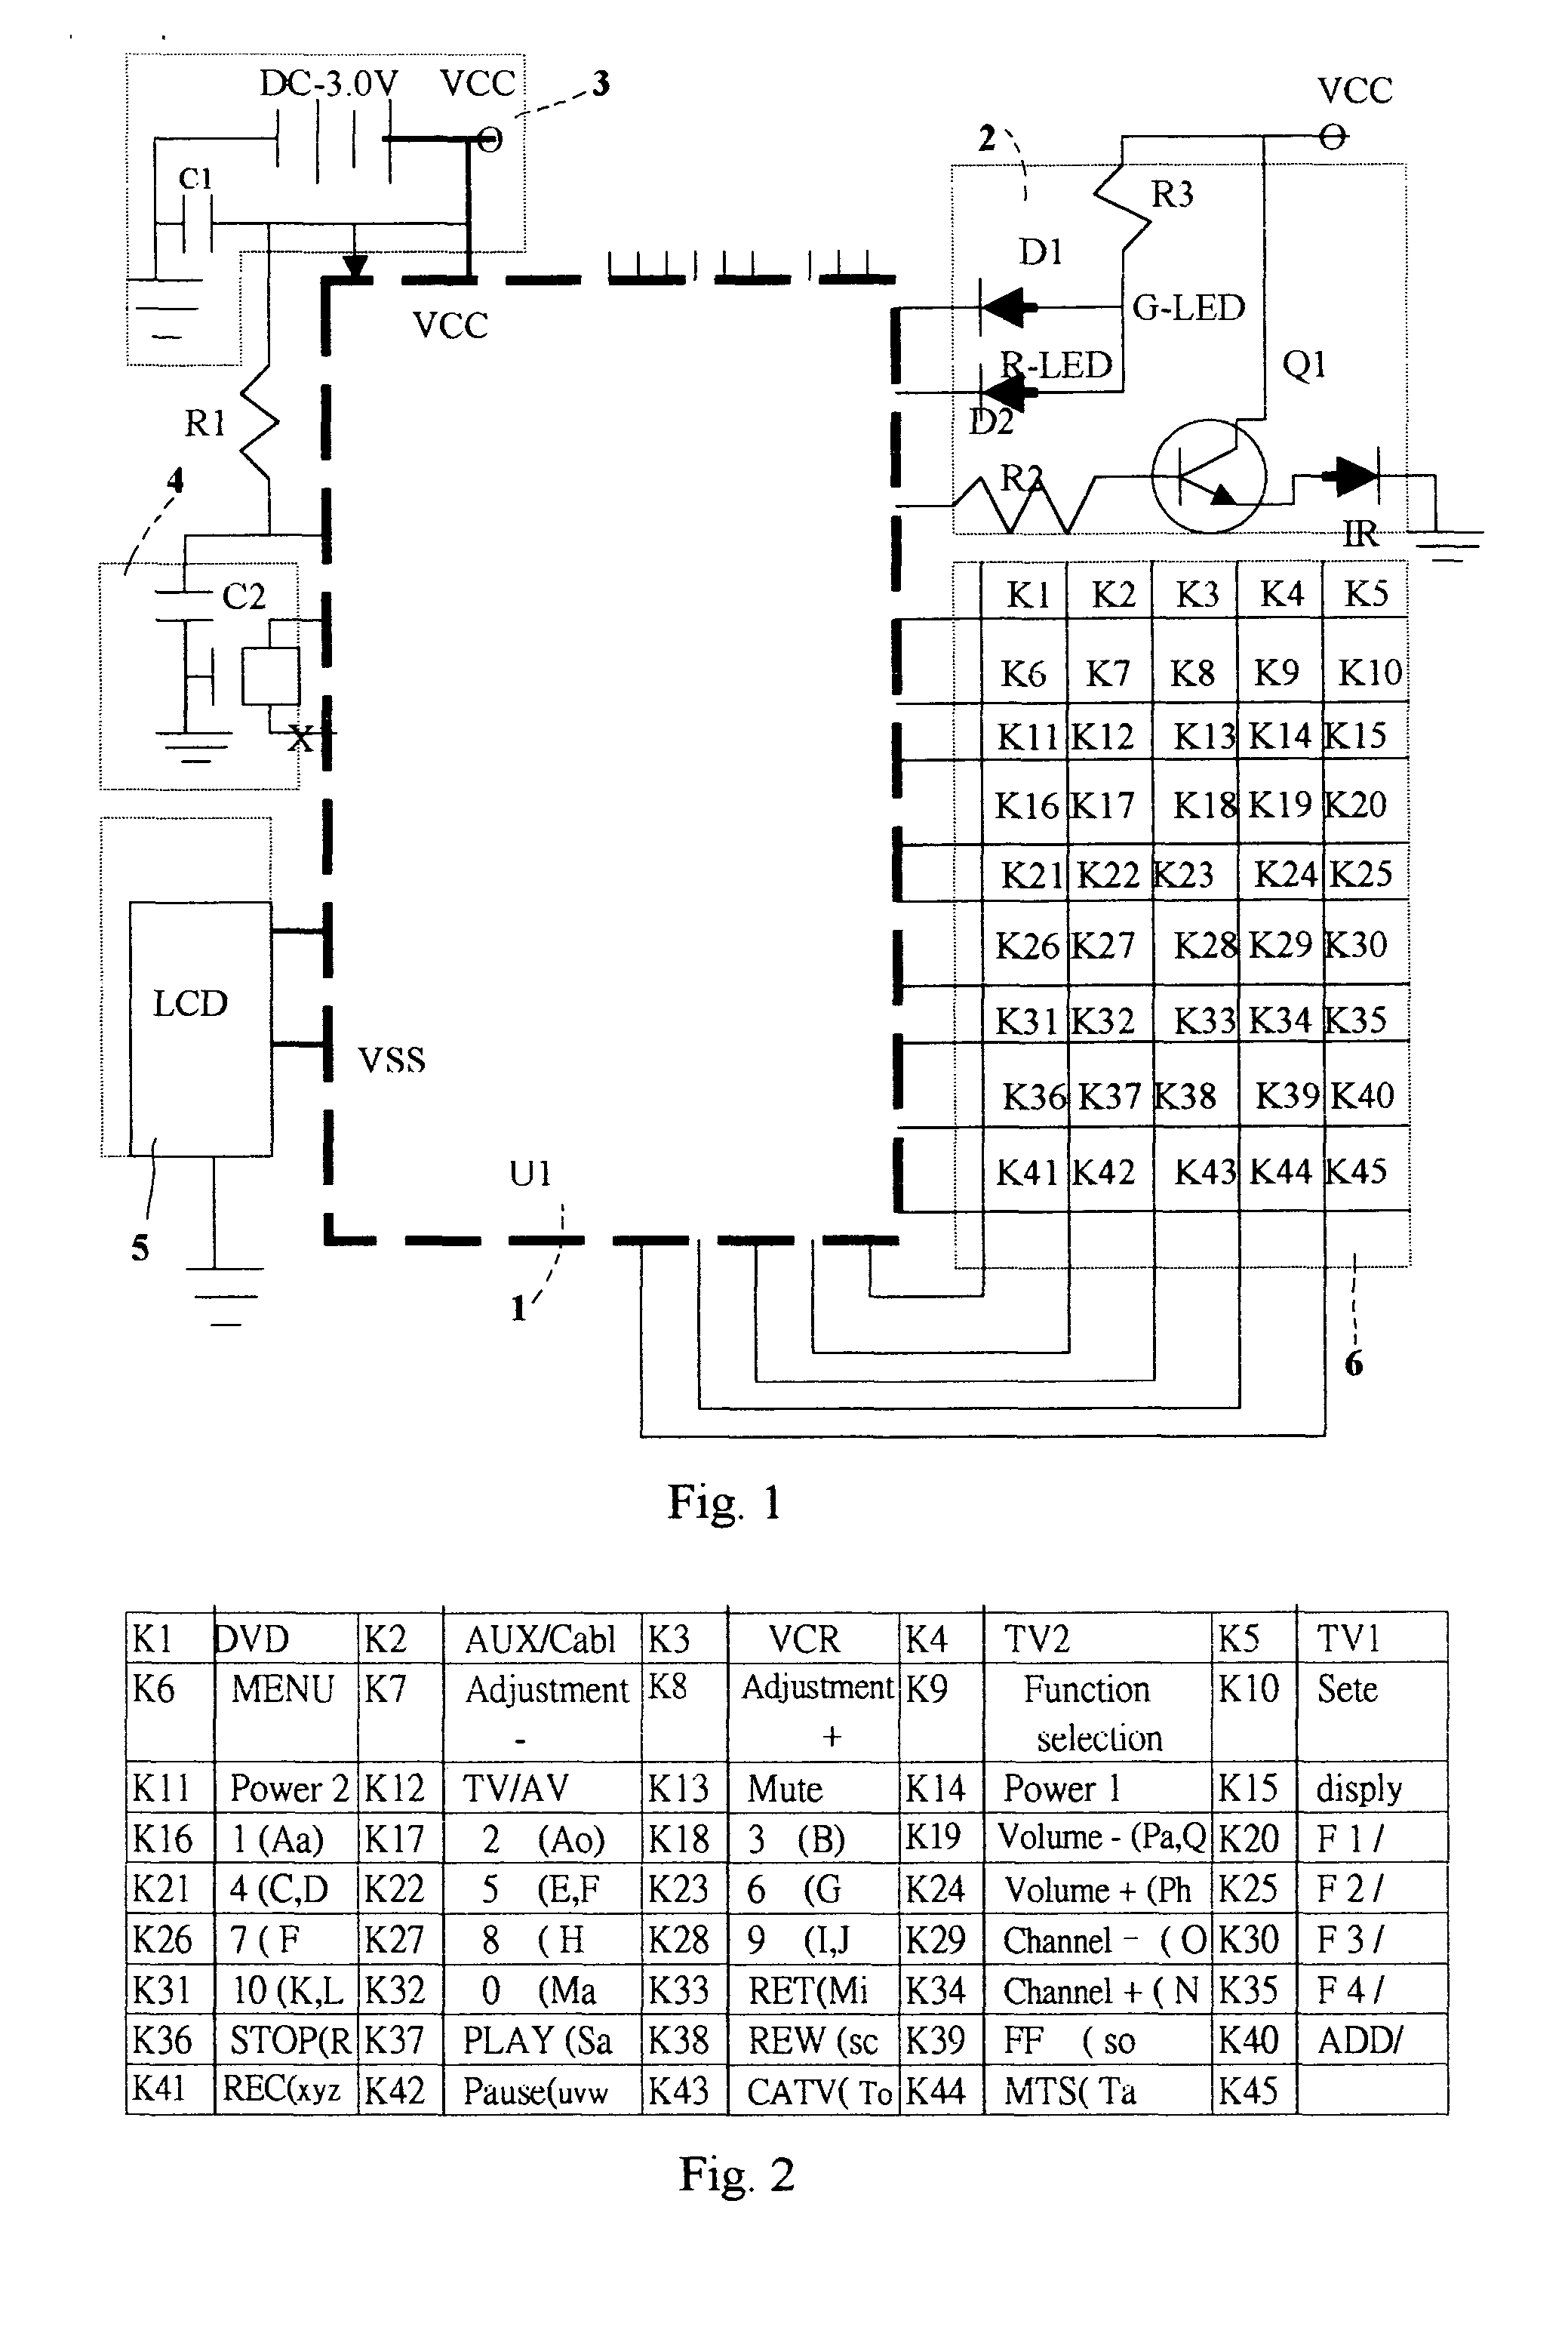 Remote controller having auto-search and timer-controlled emitting functions